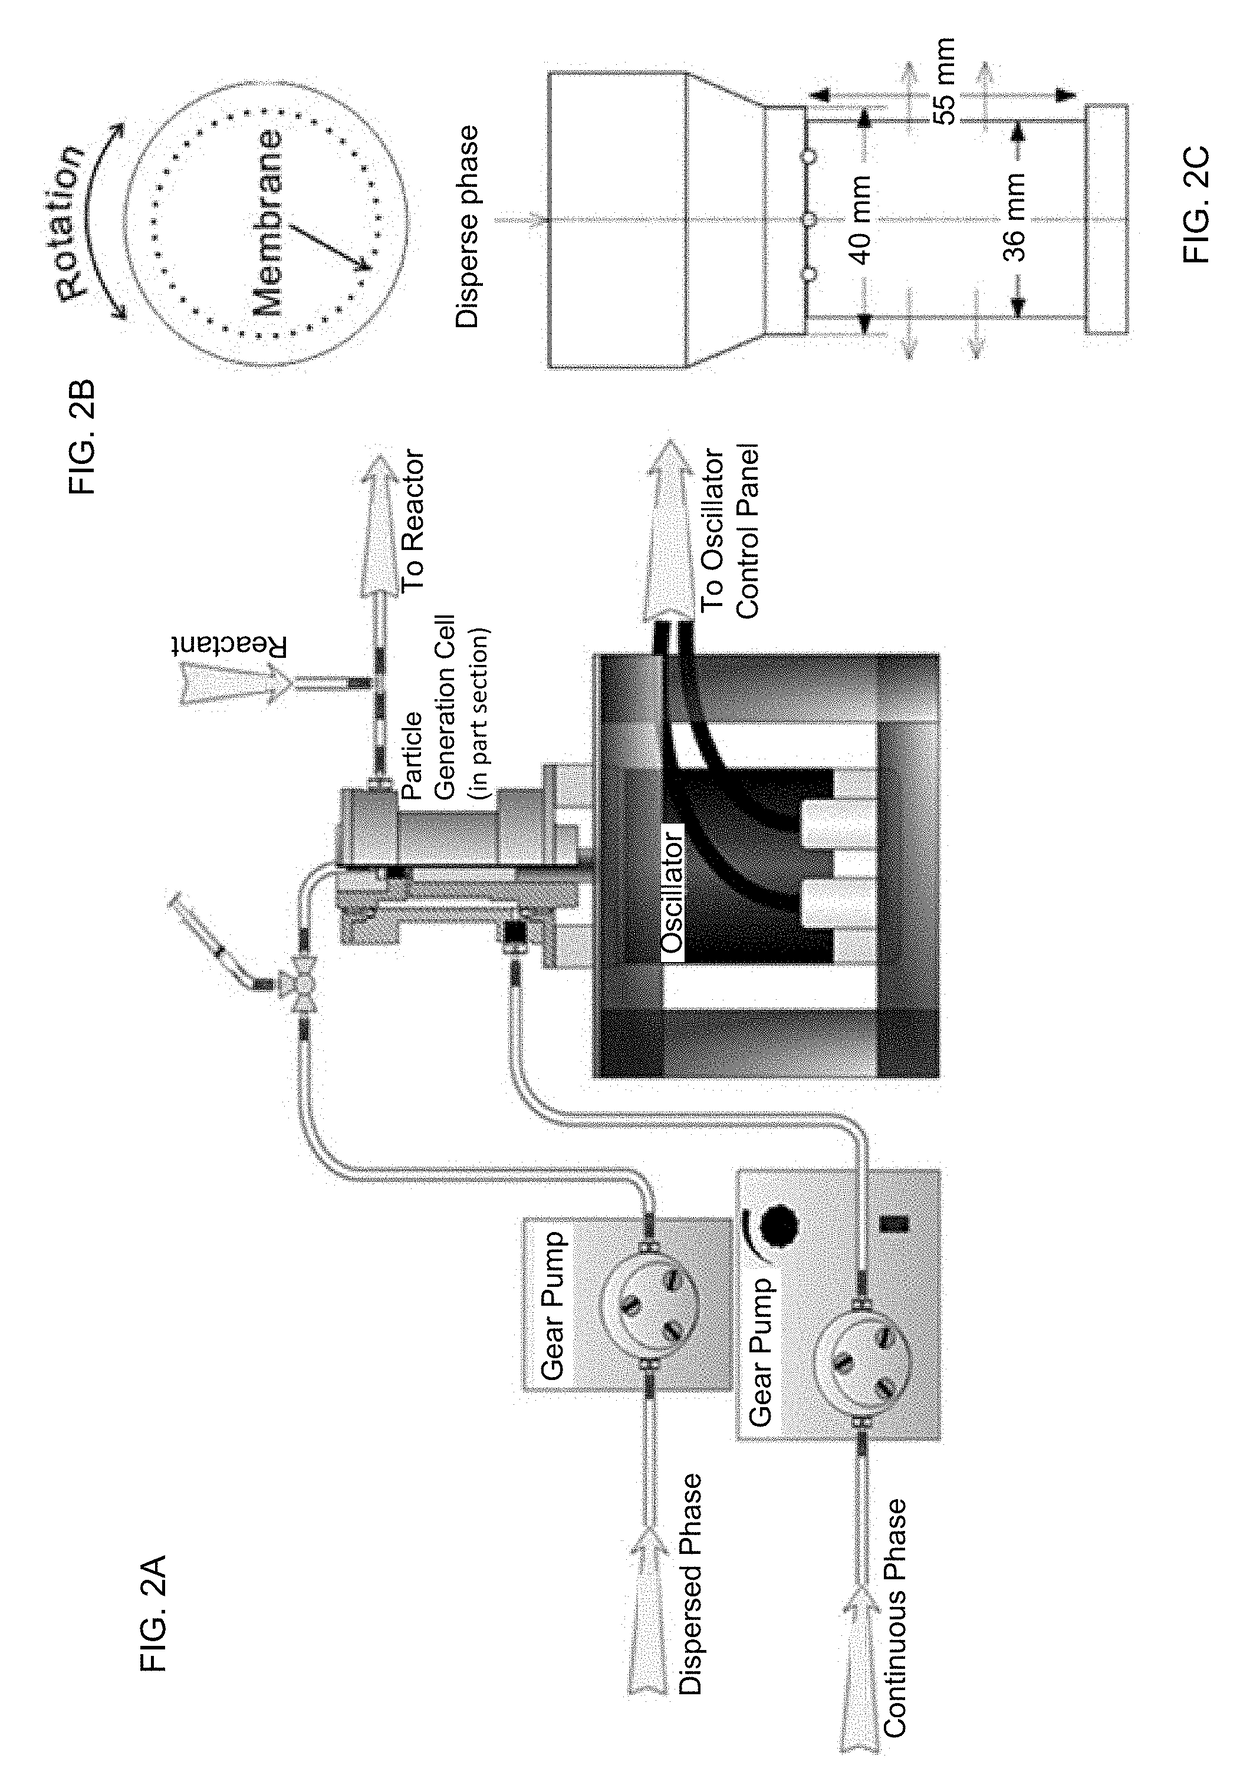 Azimuthally Oscillating Membrane Emulsification for Controlled Droplet Production